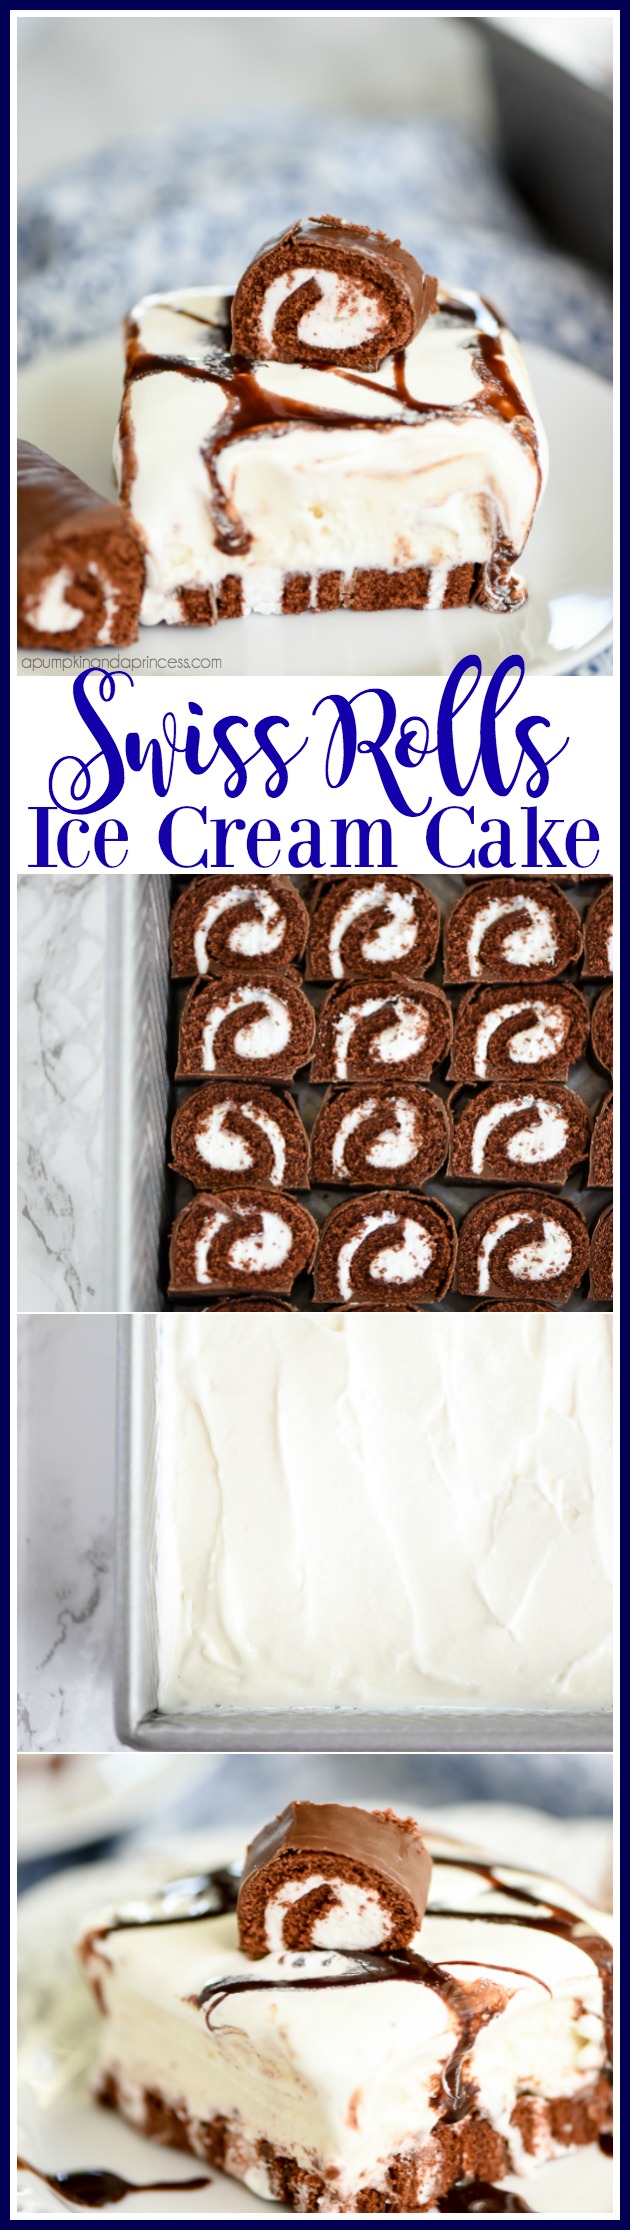 Swiss Rolls Ice Cream Cake - This easy ice cream cake recipe is perfect for summer! Layers of Swiss Rolls, vanilla ice cream, whipped cream and chocolate sauce. 